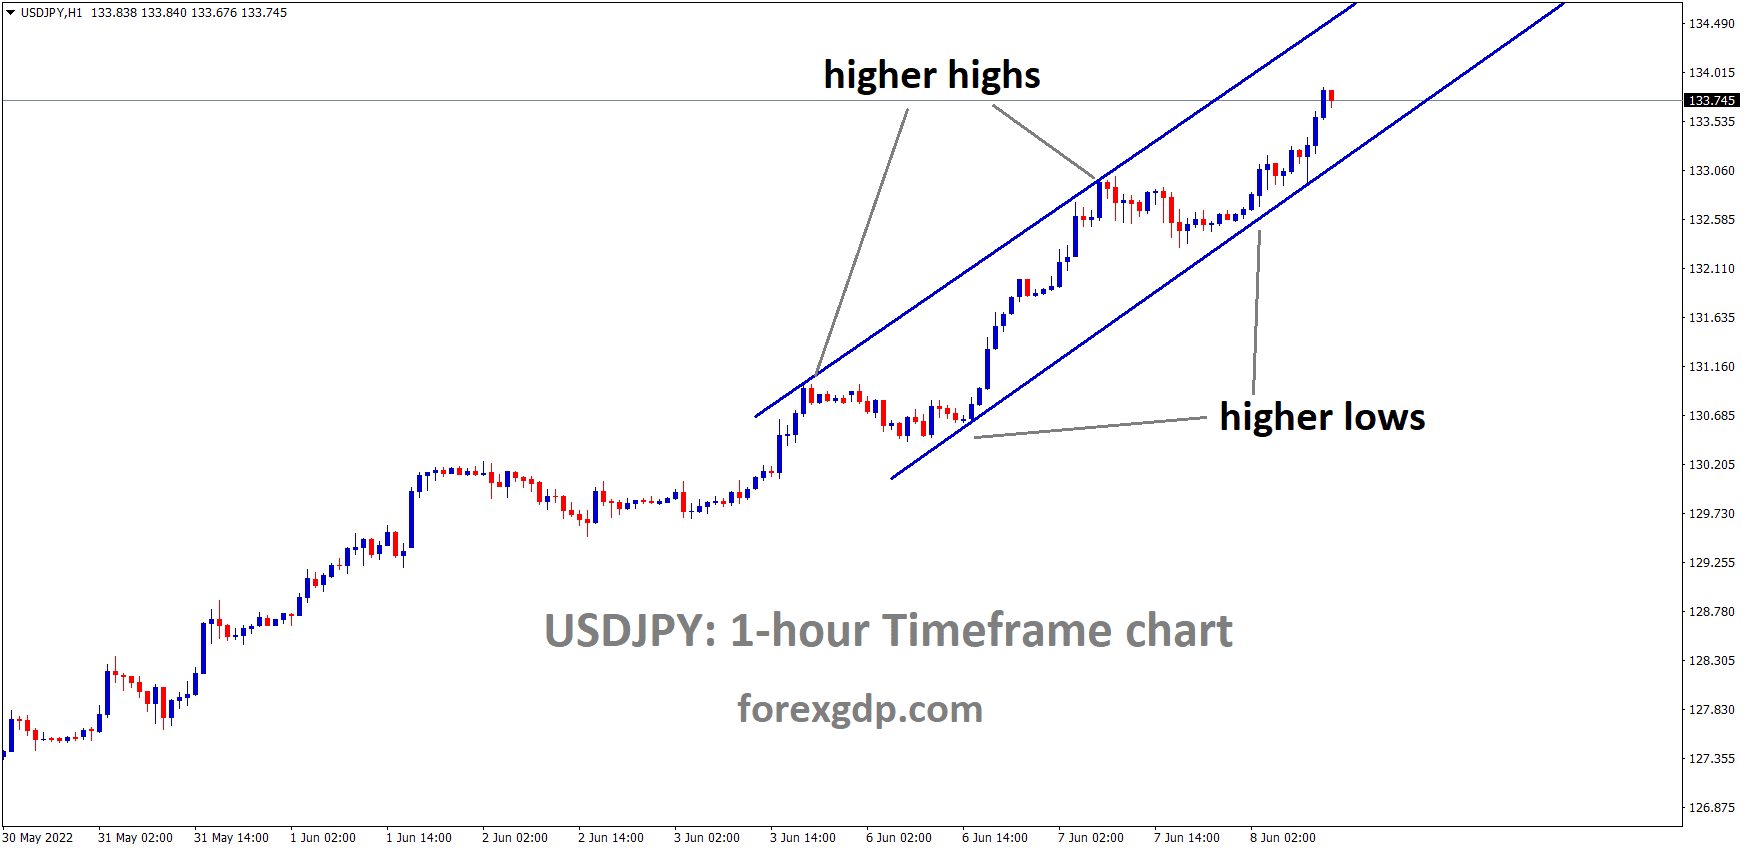 USDJPY is moving in an Ascending channel and the Market has rebounded from the higher low area of the channel